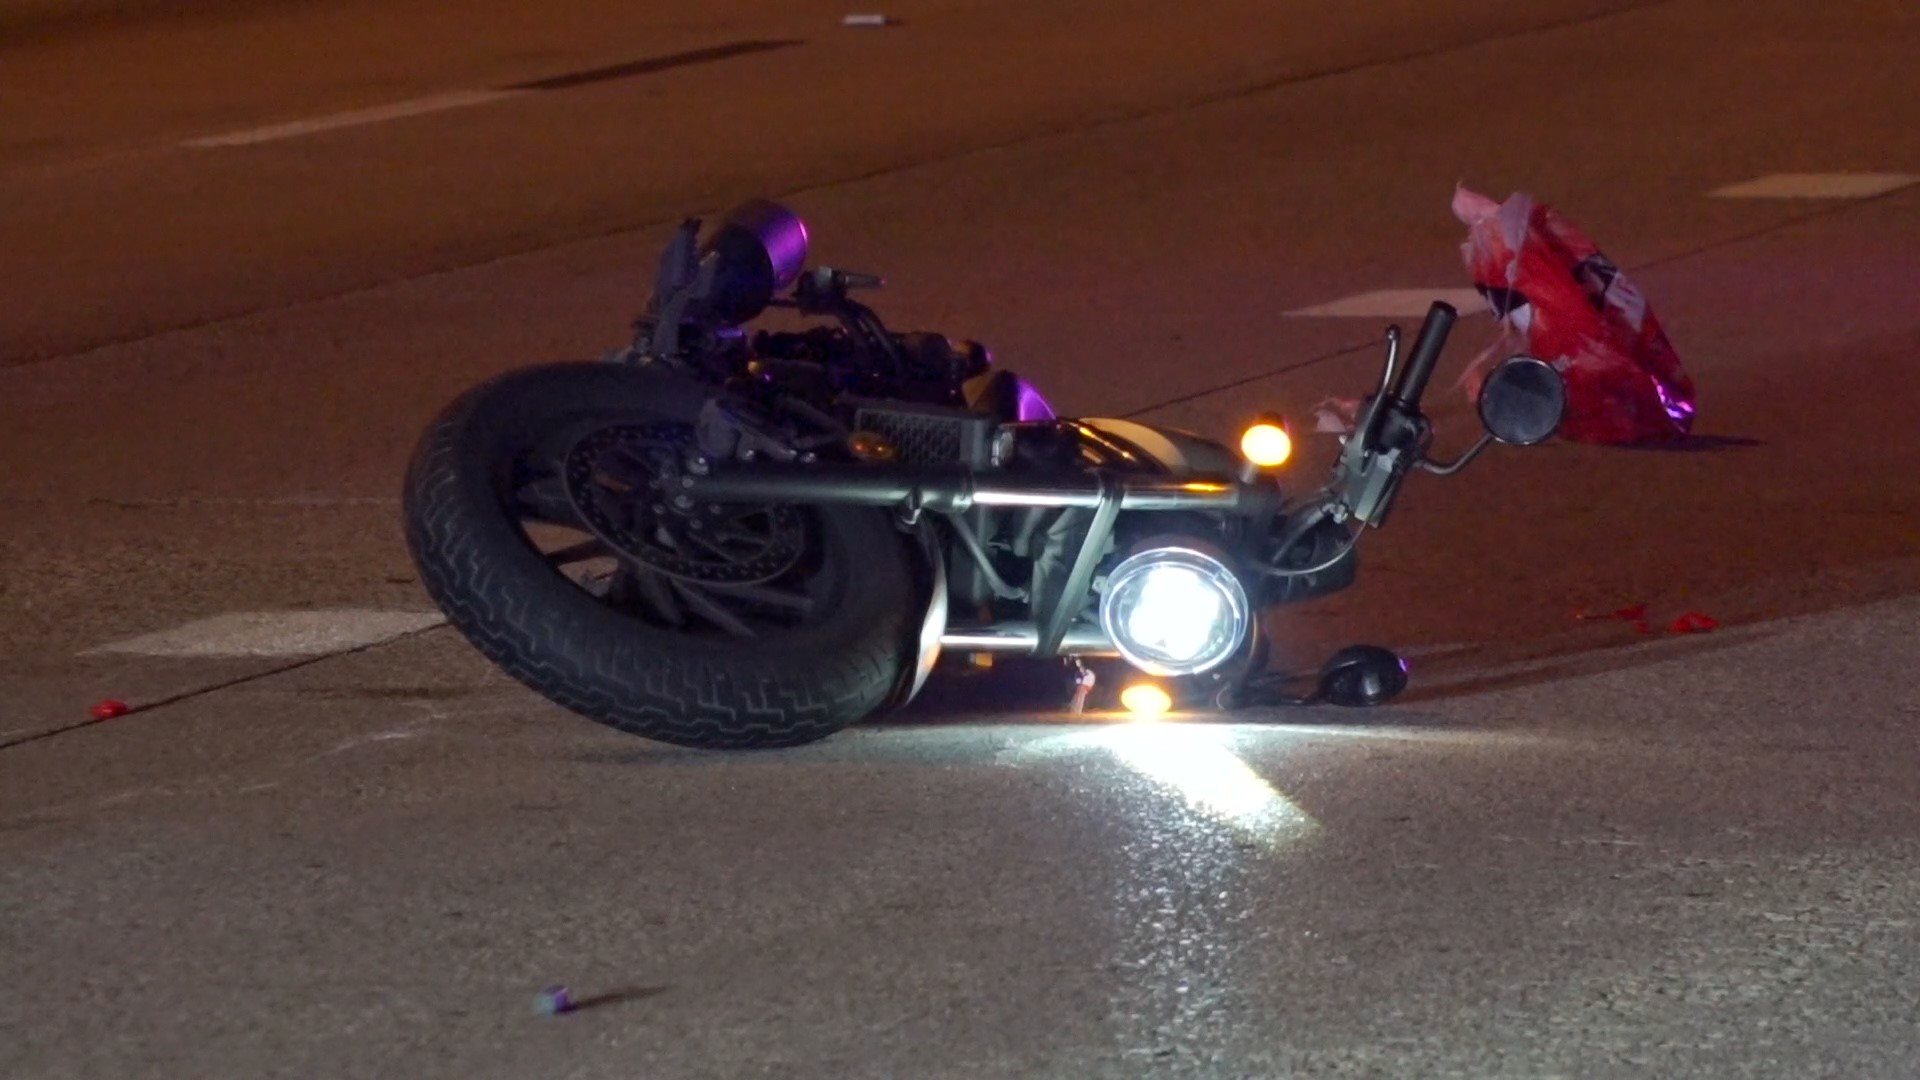 Houston police are investigating a serious crash between a motorcycle and a pedestrian that shut down the 610 North Loop’s eastbound lanes early Thursday.